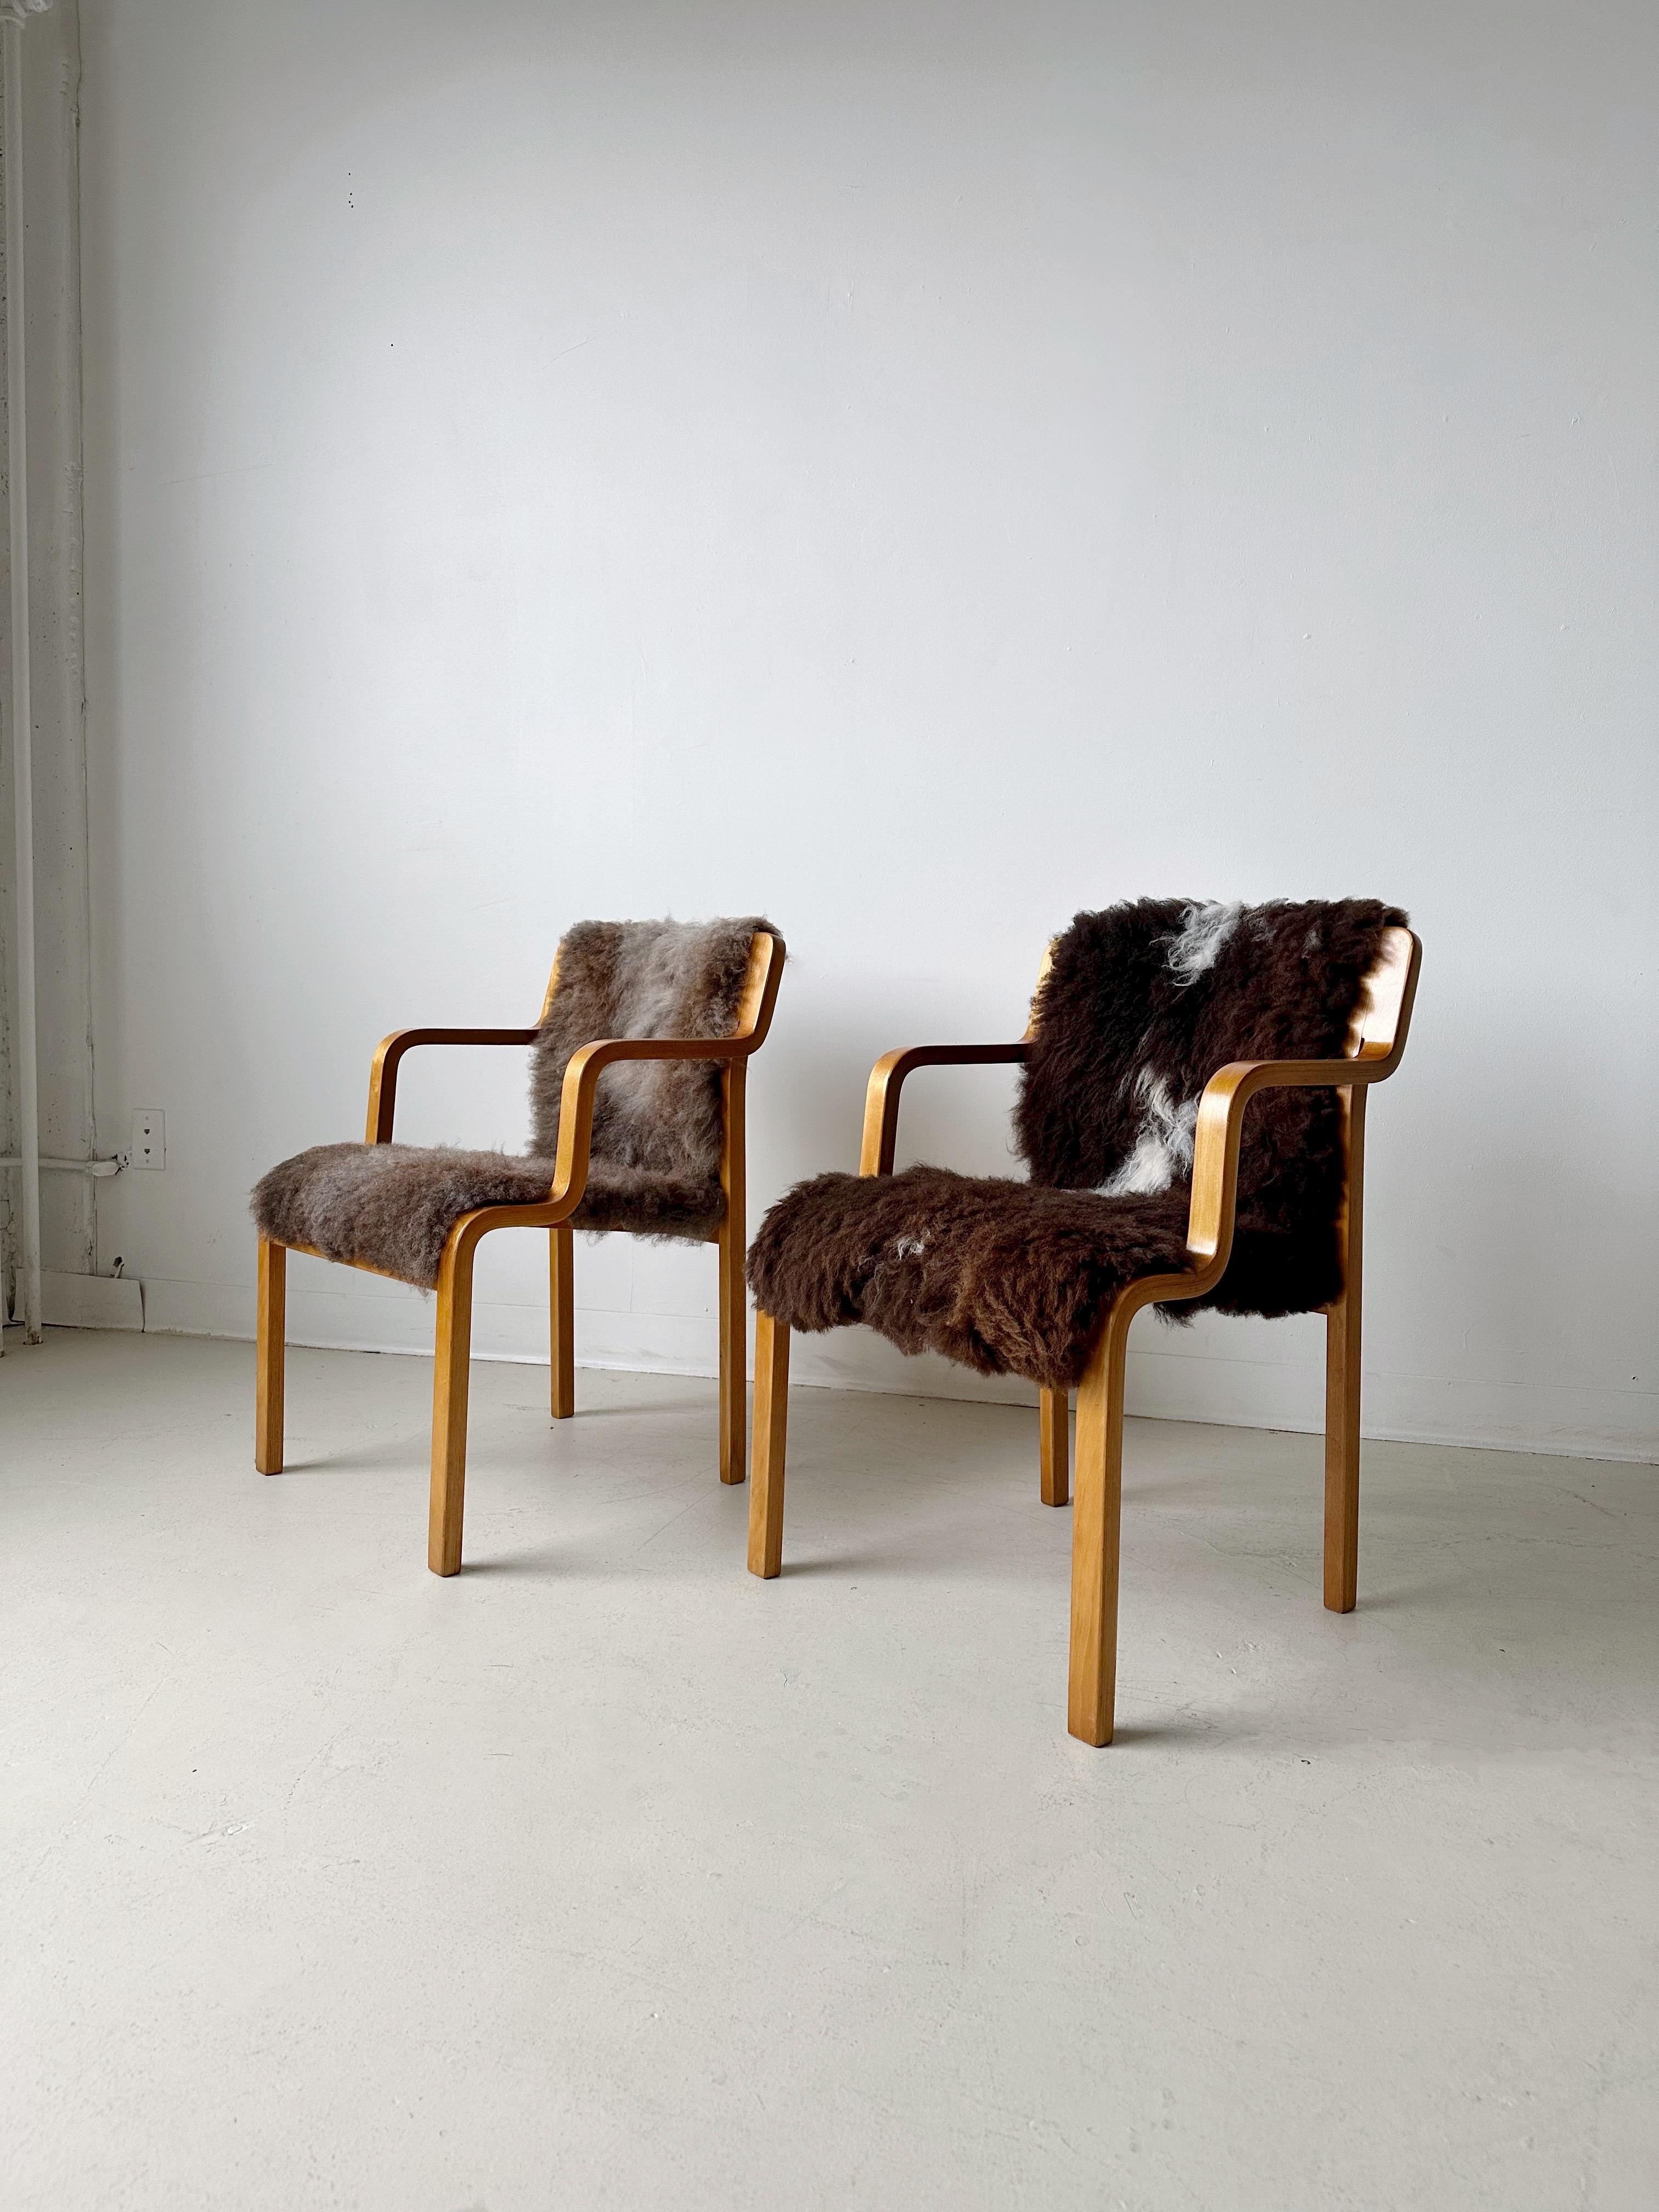 Pair of bentwood chairs by ASKO Finland, both reupholstered in sheepskin.

Like new condition.